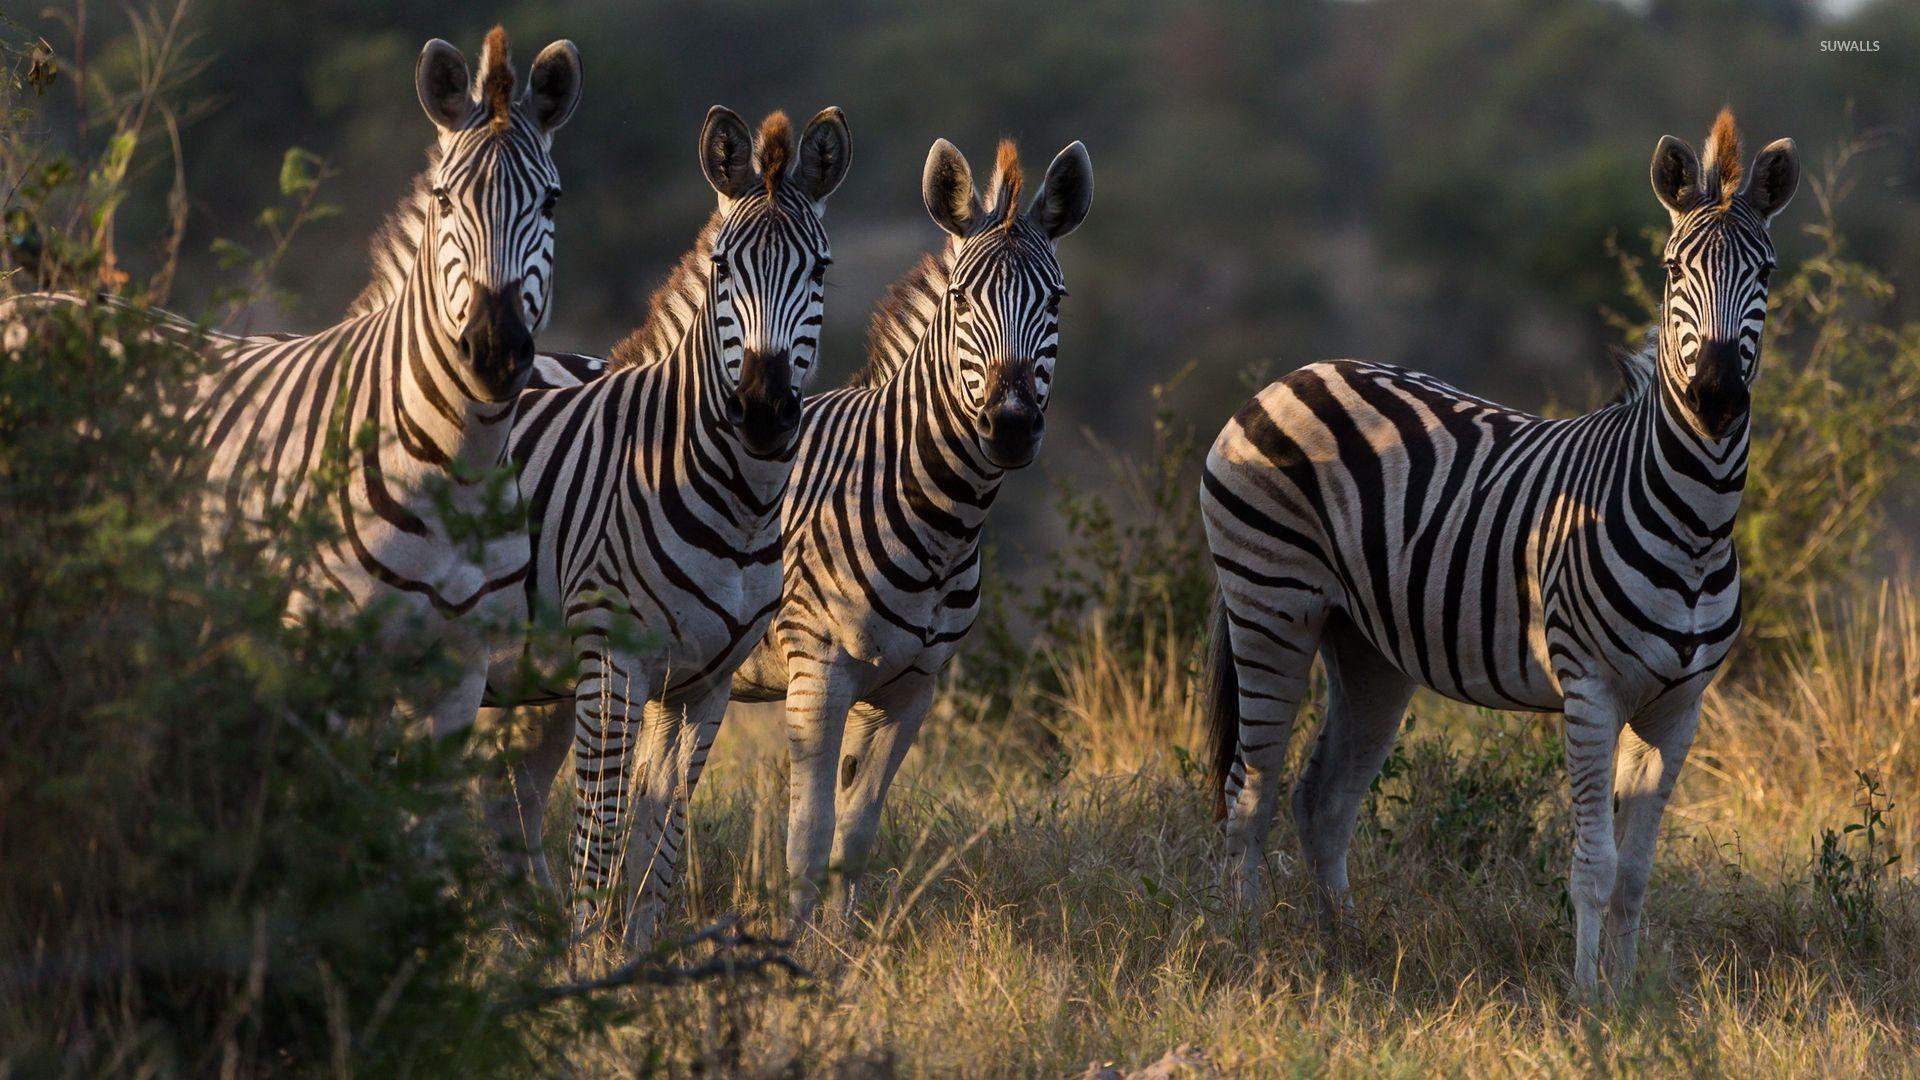 Zebras drinking water from the river wallpaper wallpaper